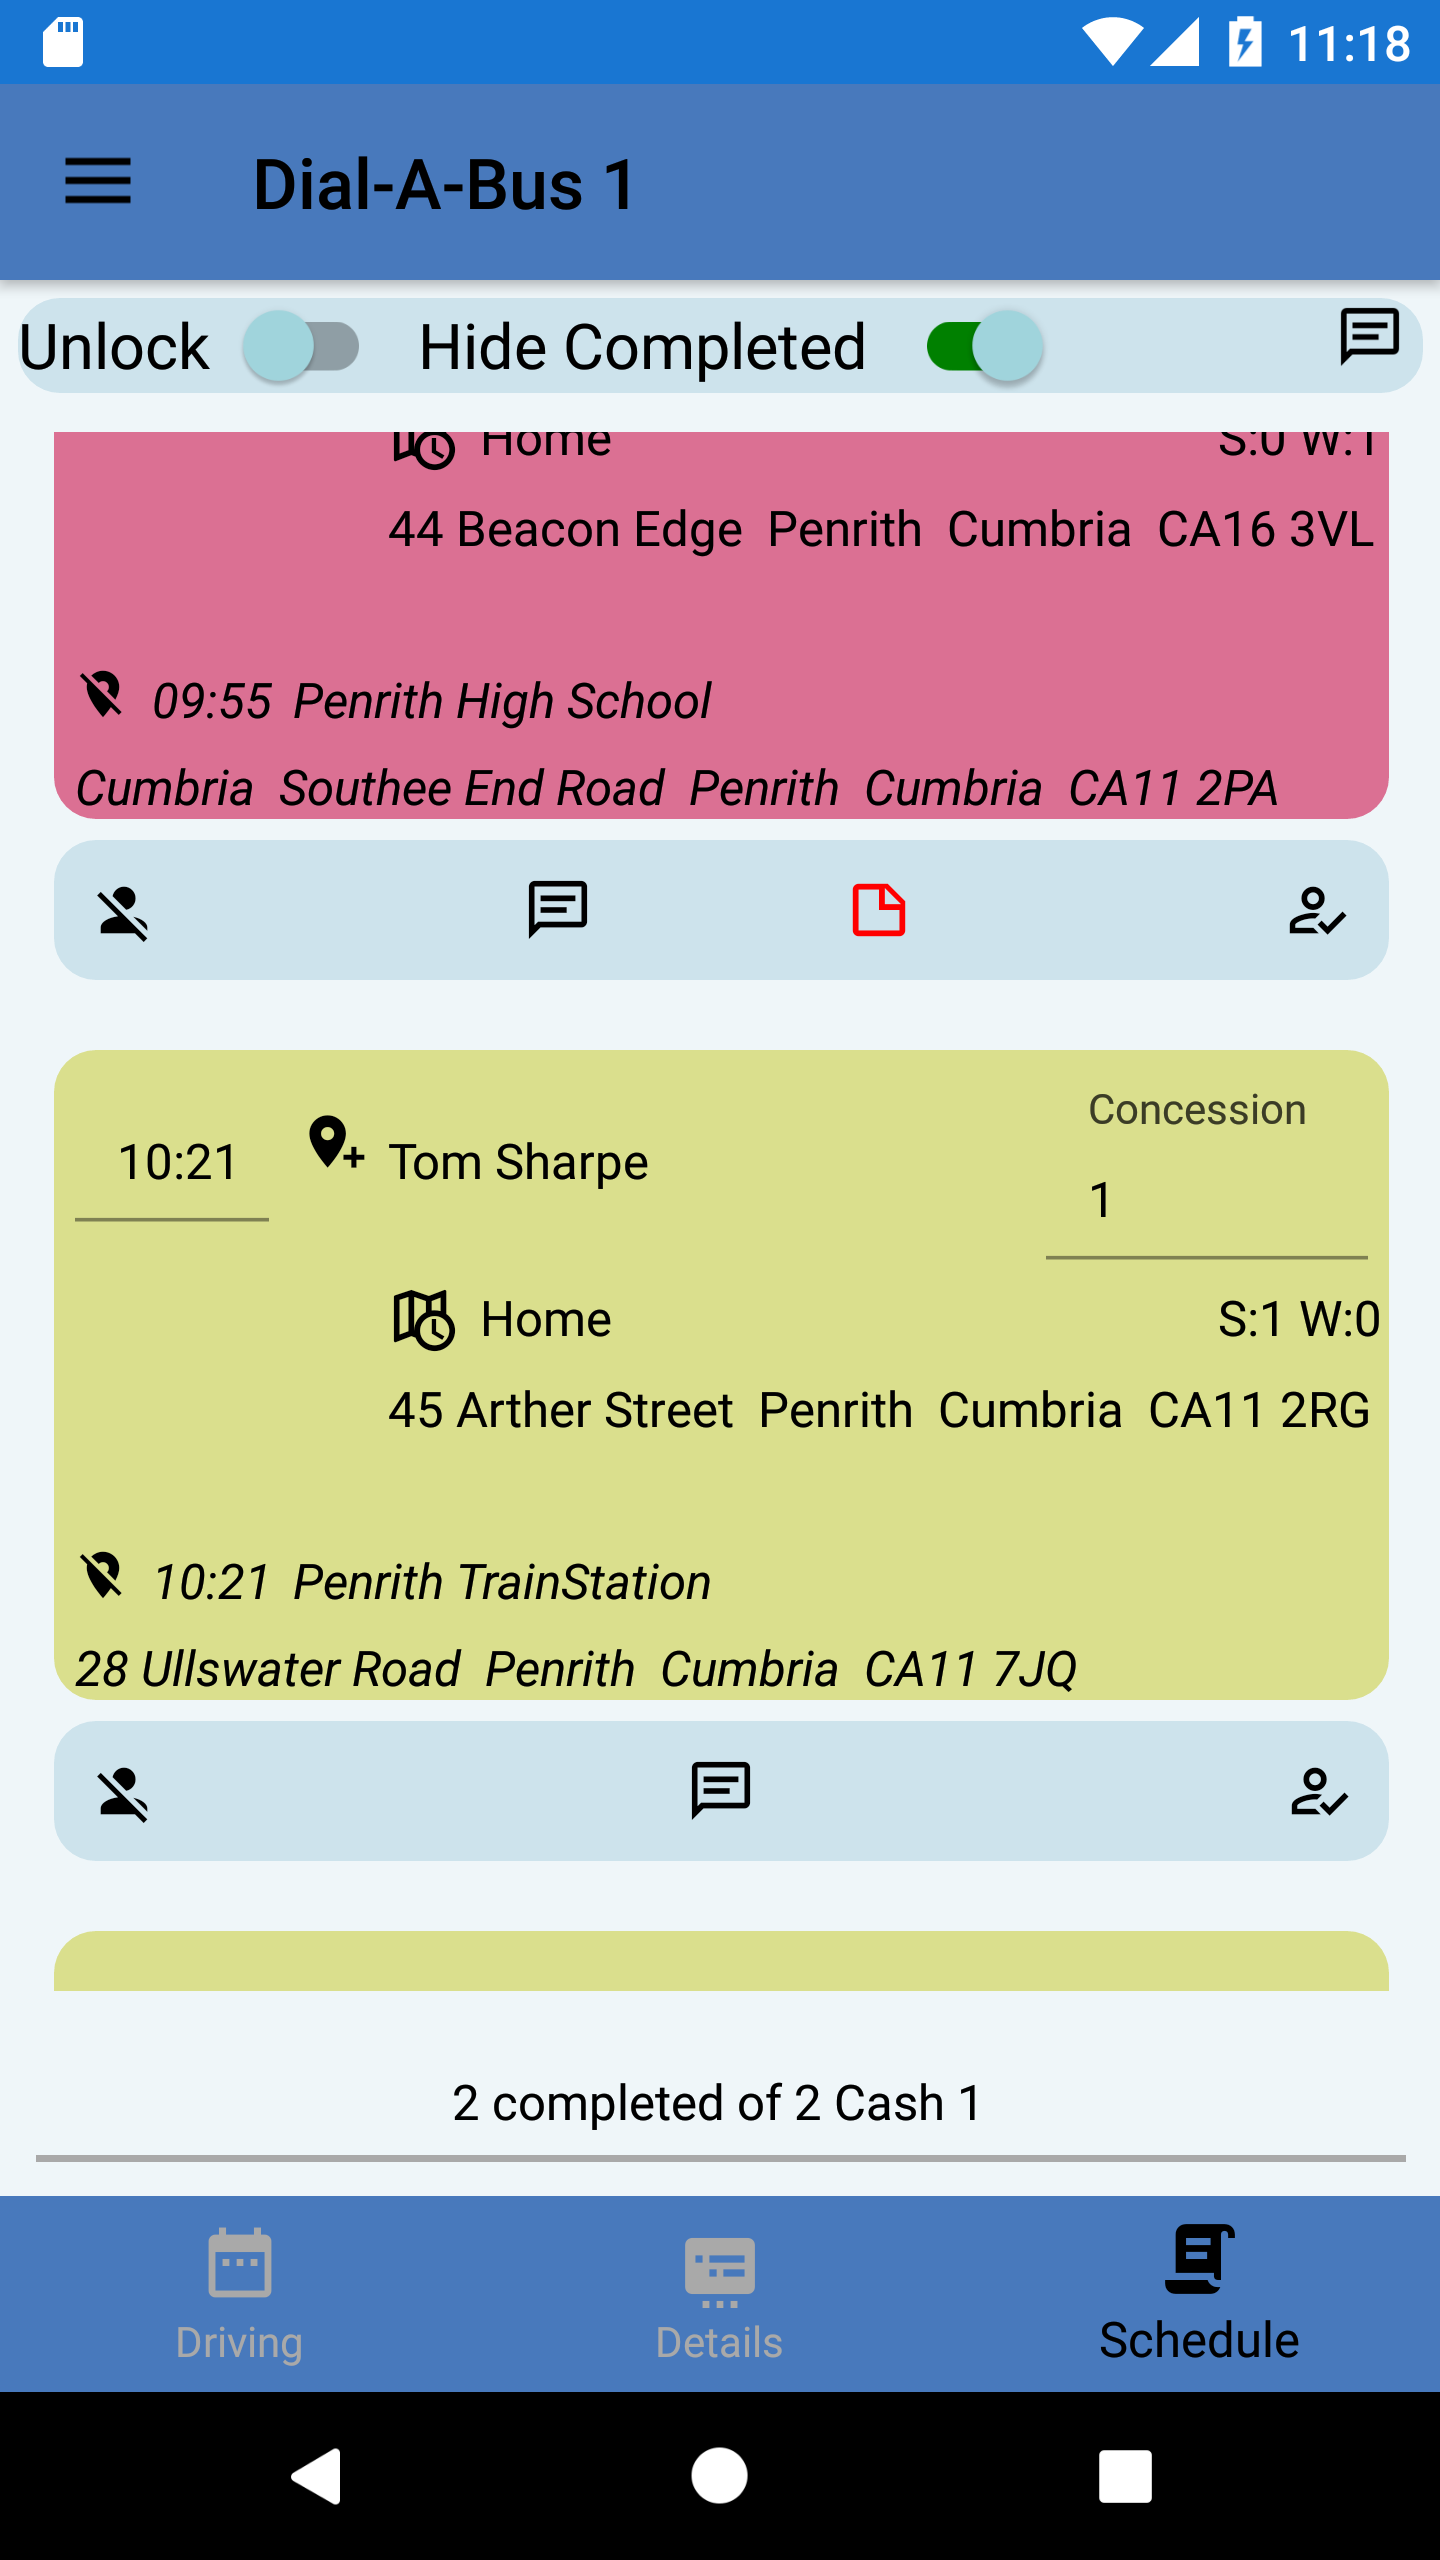 Screenshot of ctxGoDrive drivers schedule for a dial-a-service